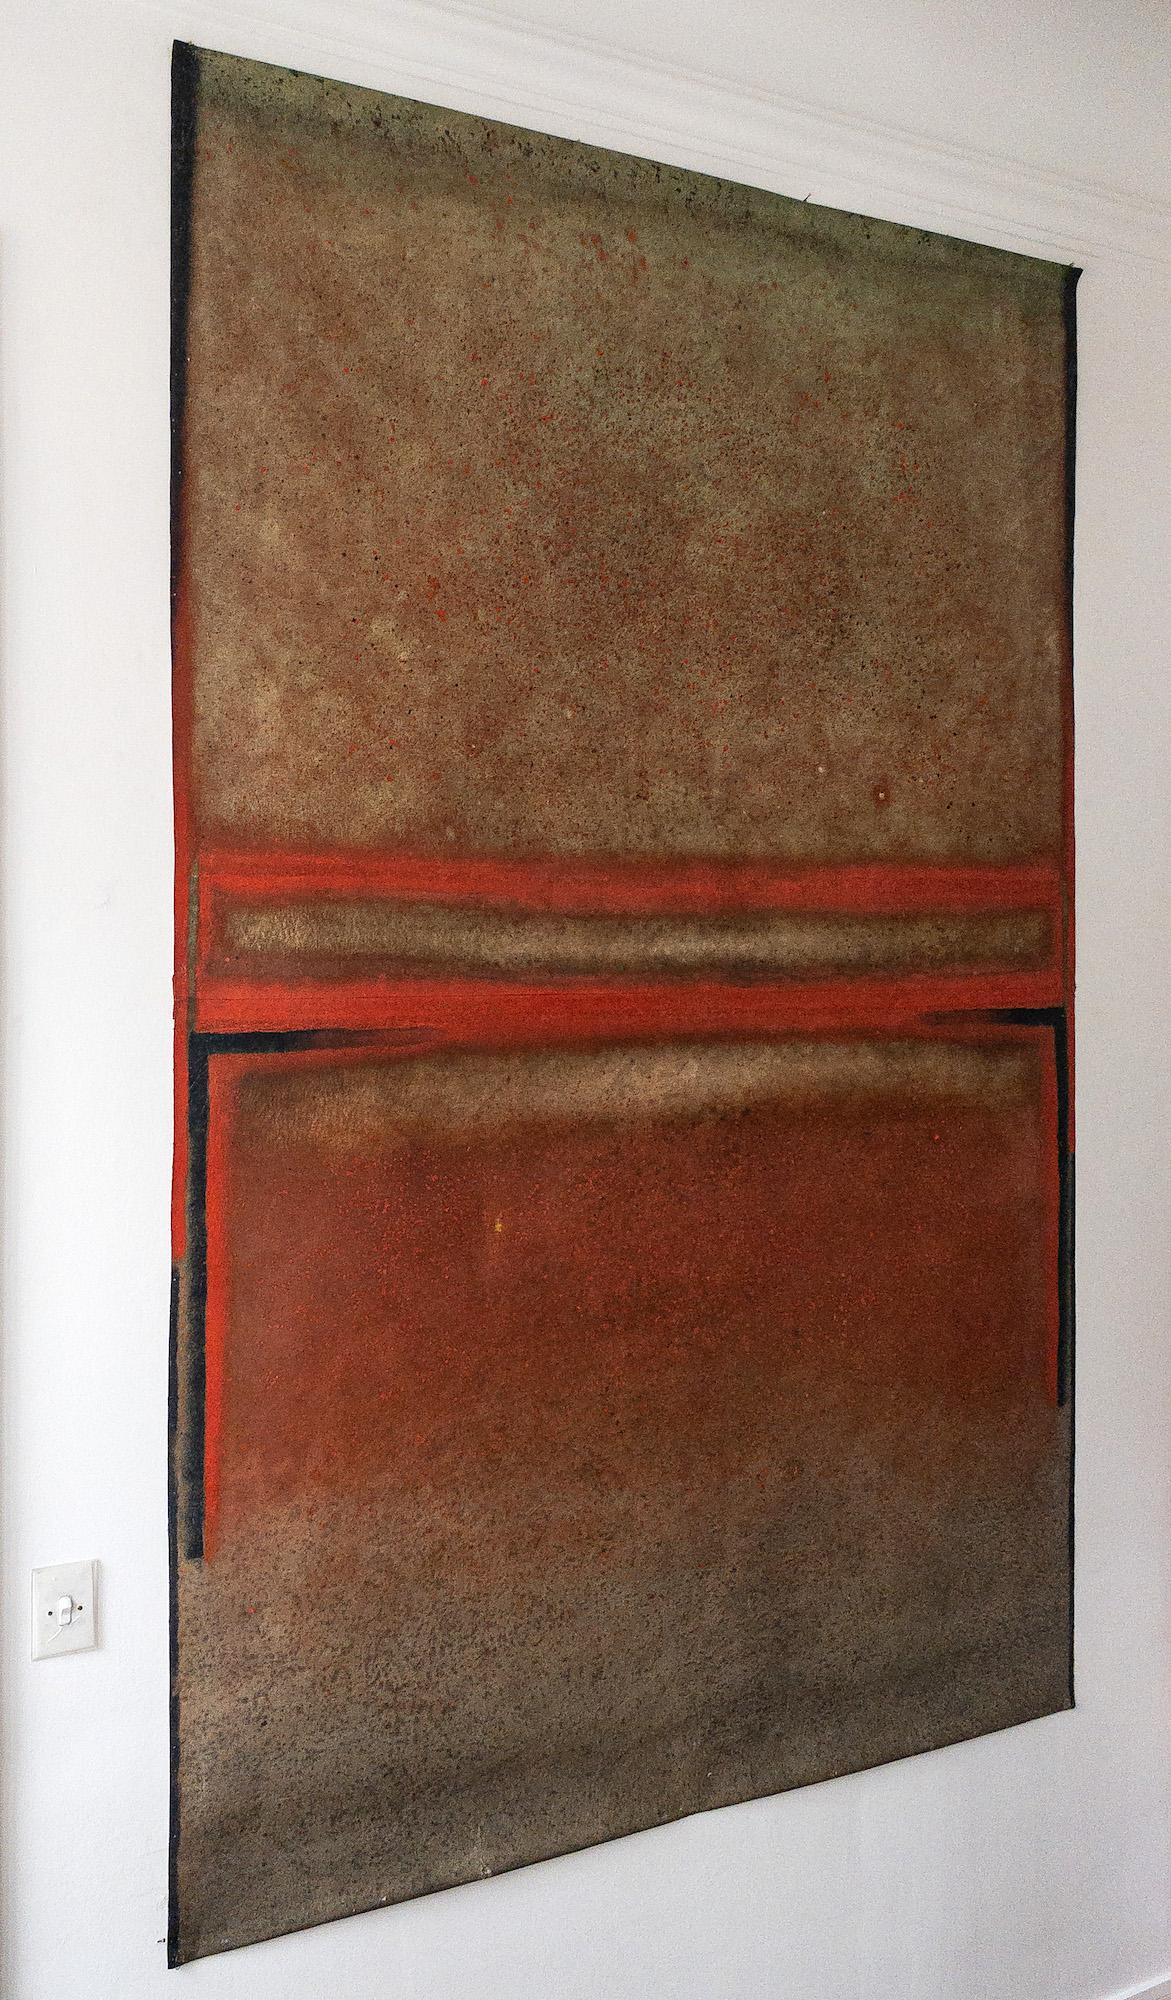 Untitled XXXI is a unique oil on free-standing canvas painting by contemporary artist Ferle, dimensions are 200 cm × 140 cm (78.7 × 55.1 in).
The artwork is signed, sold unframed and comes with a certificate of authenticity.

A viewer would first